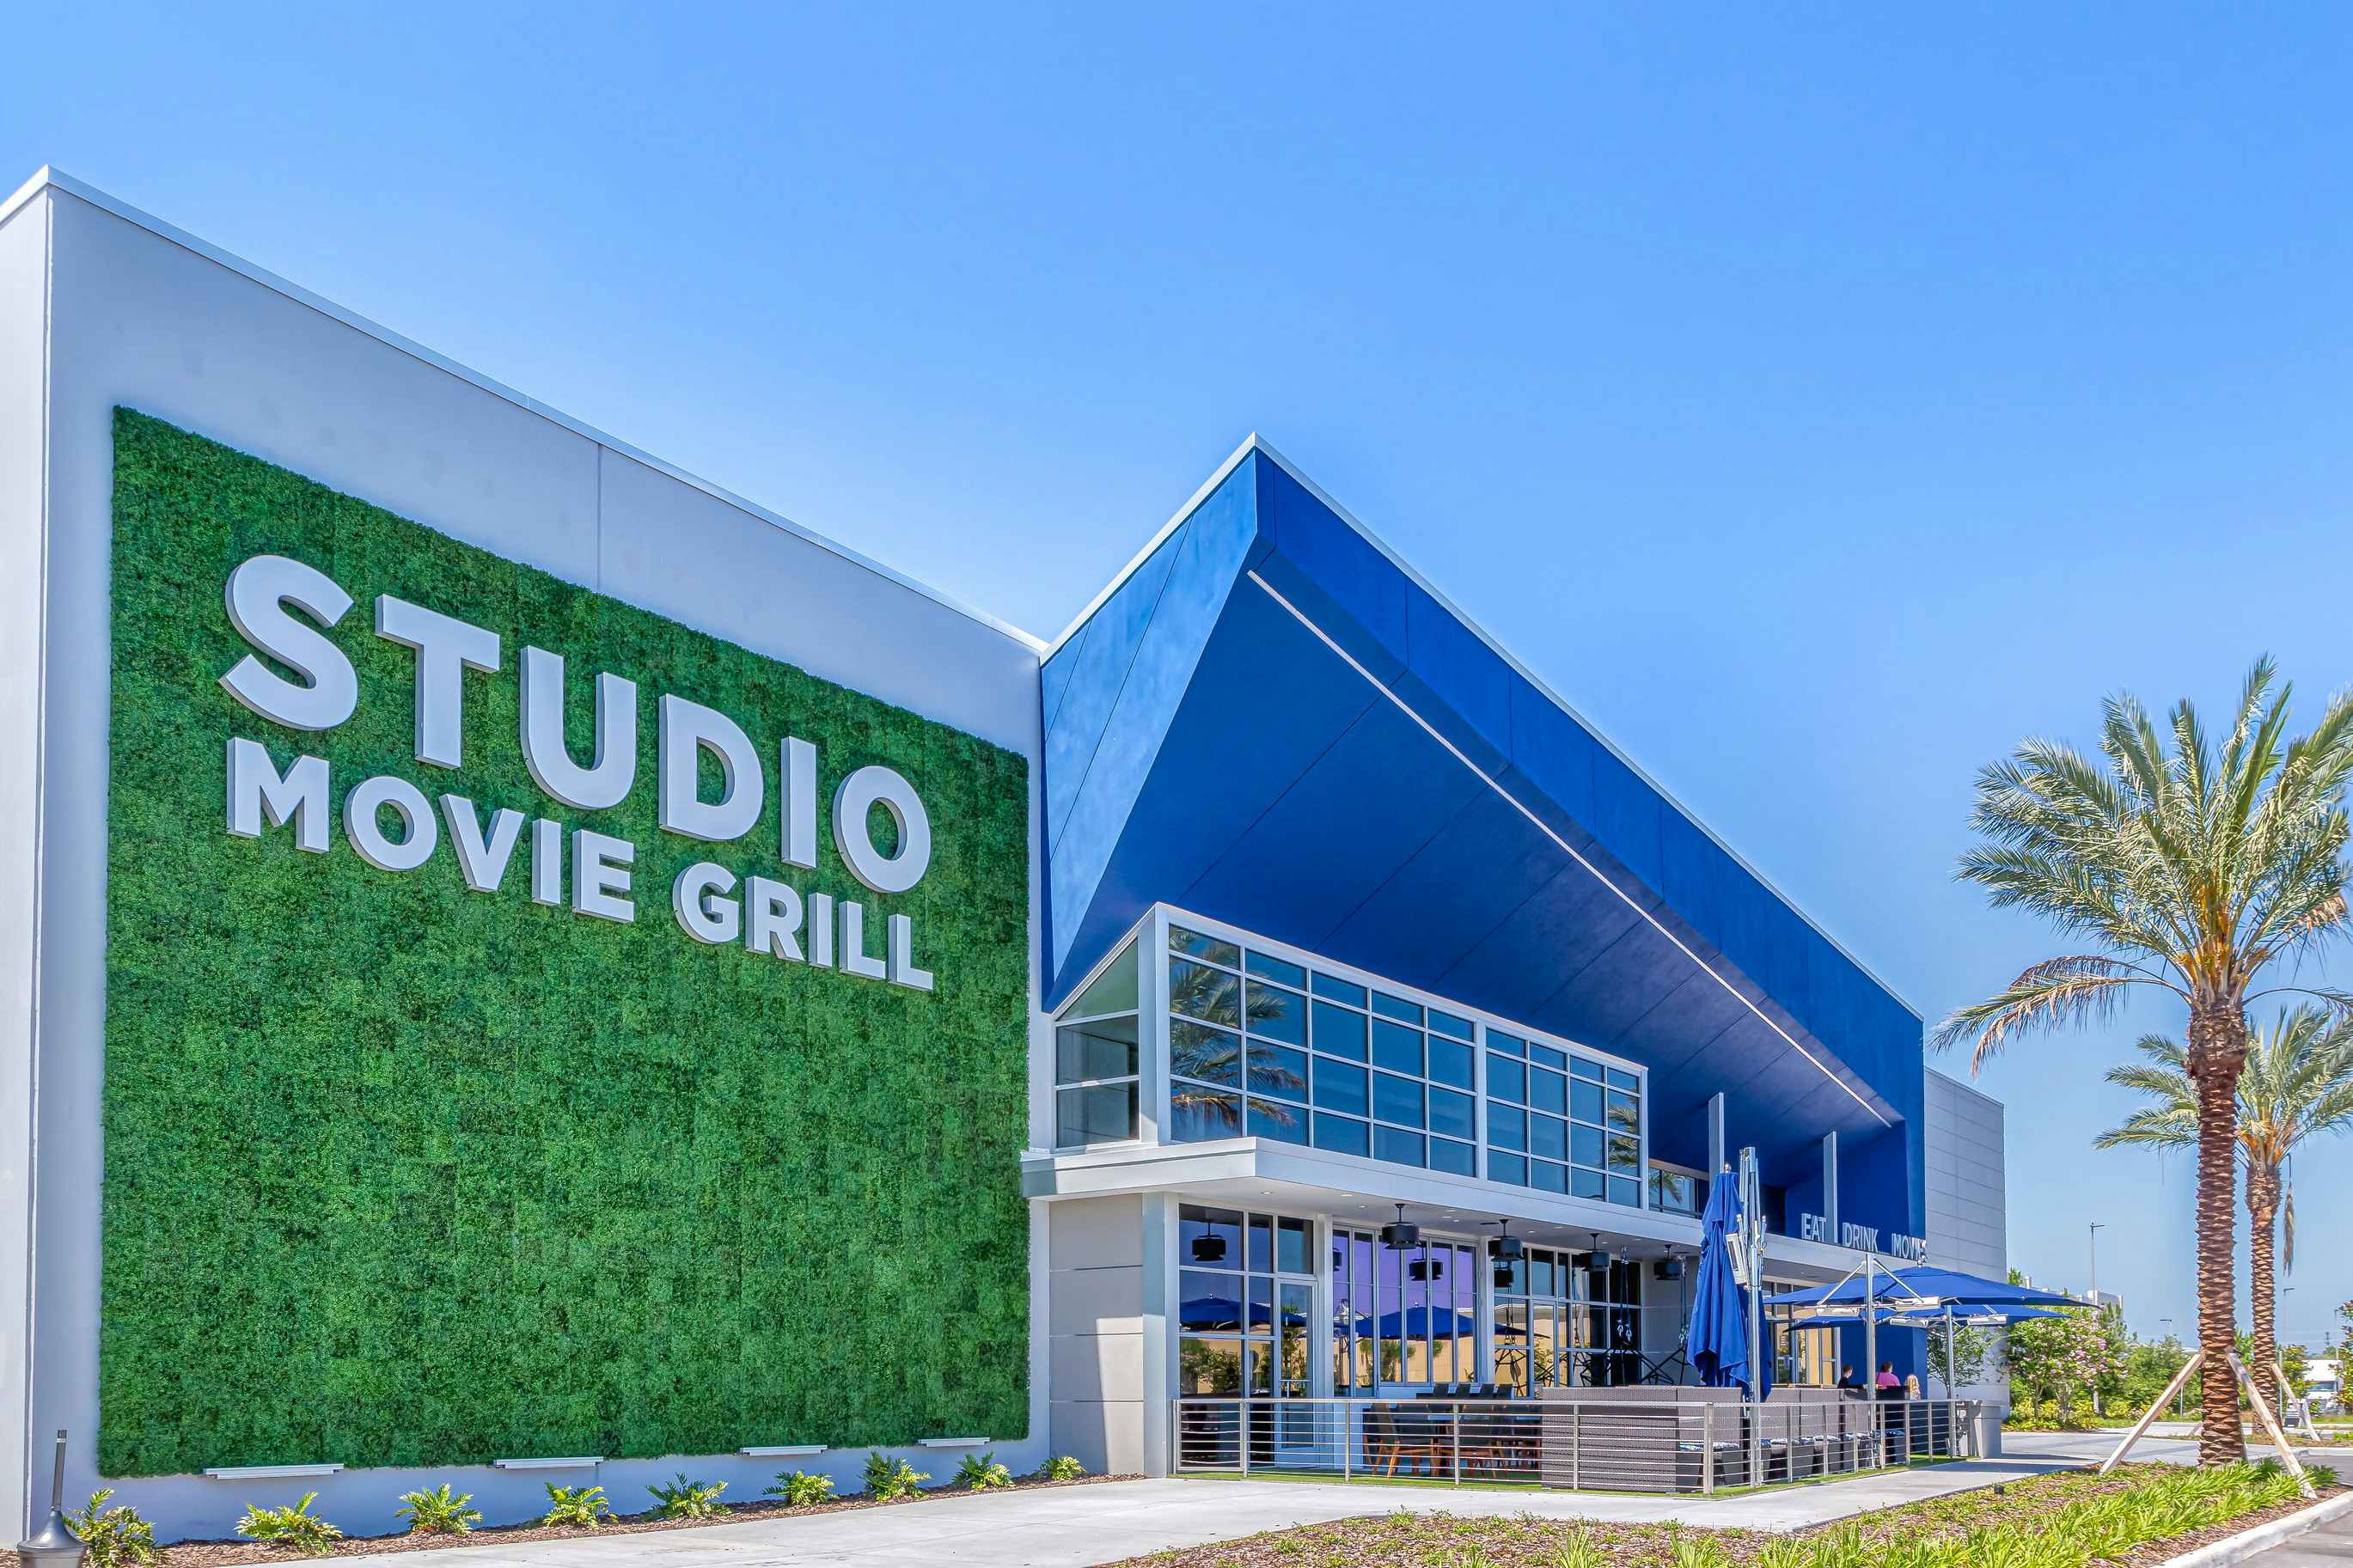 View of Studio Movie Grill entrance outside with parasols and palm trees